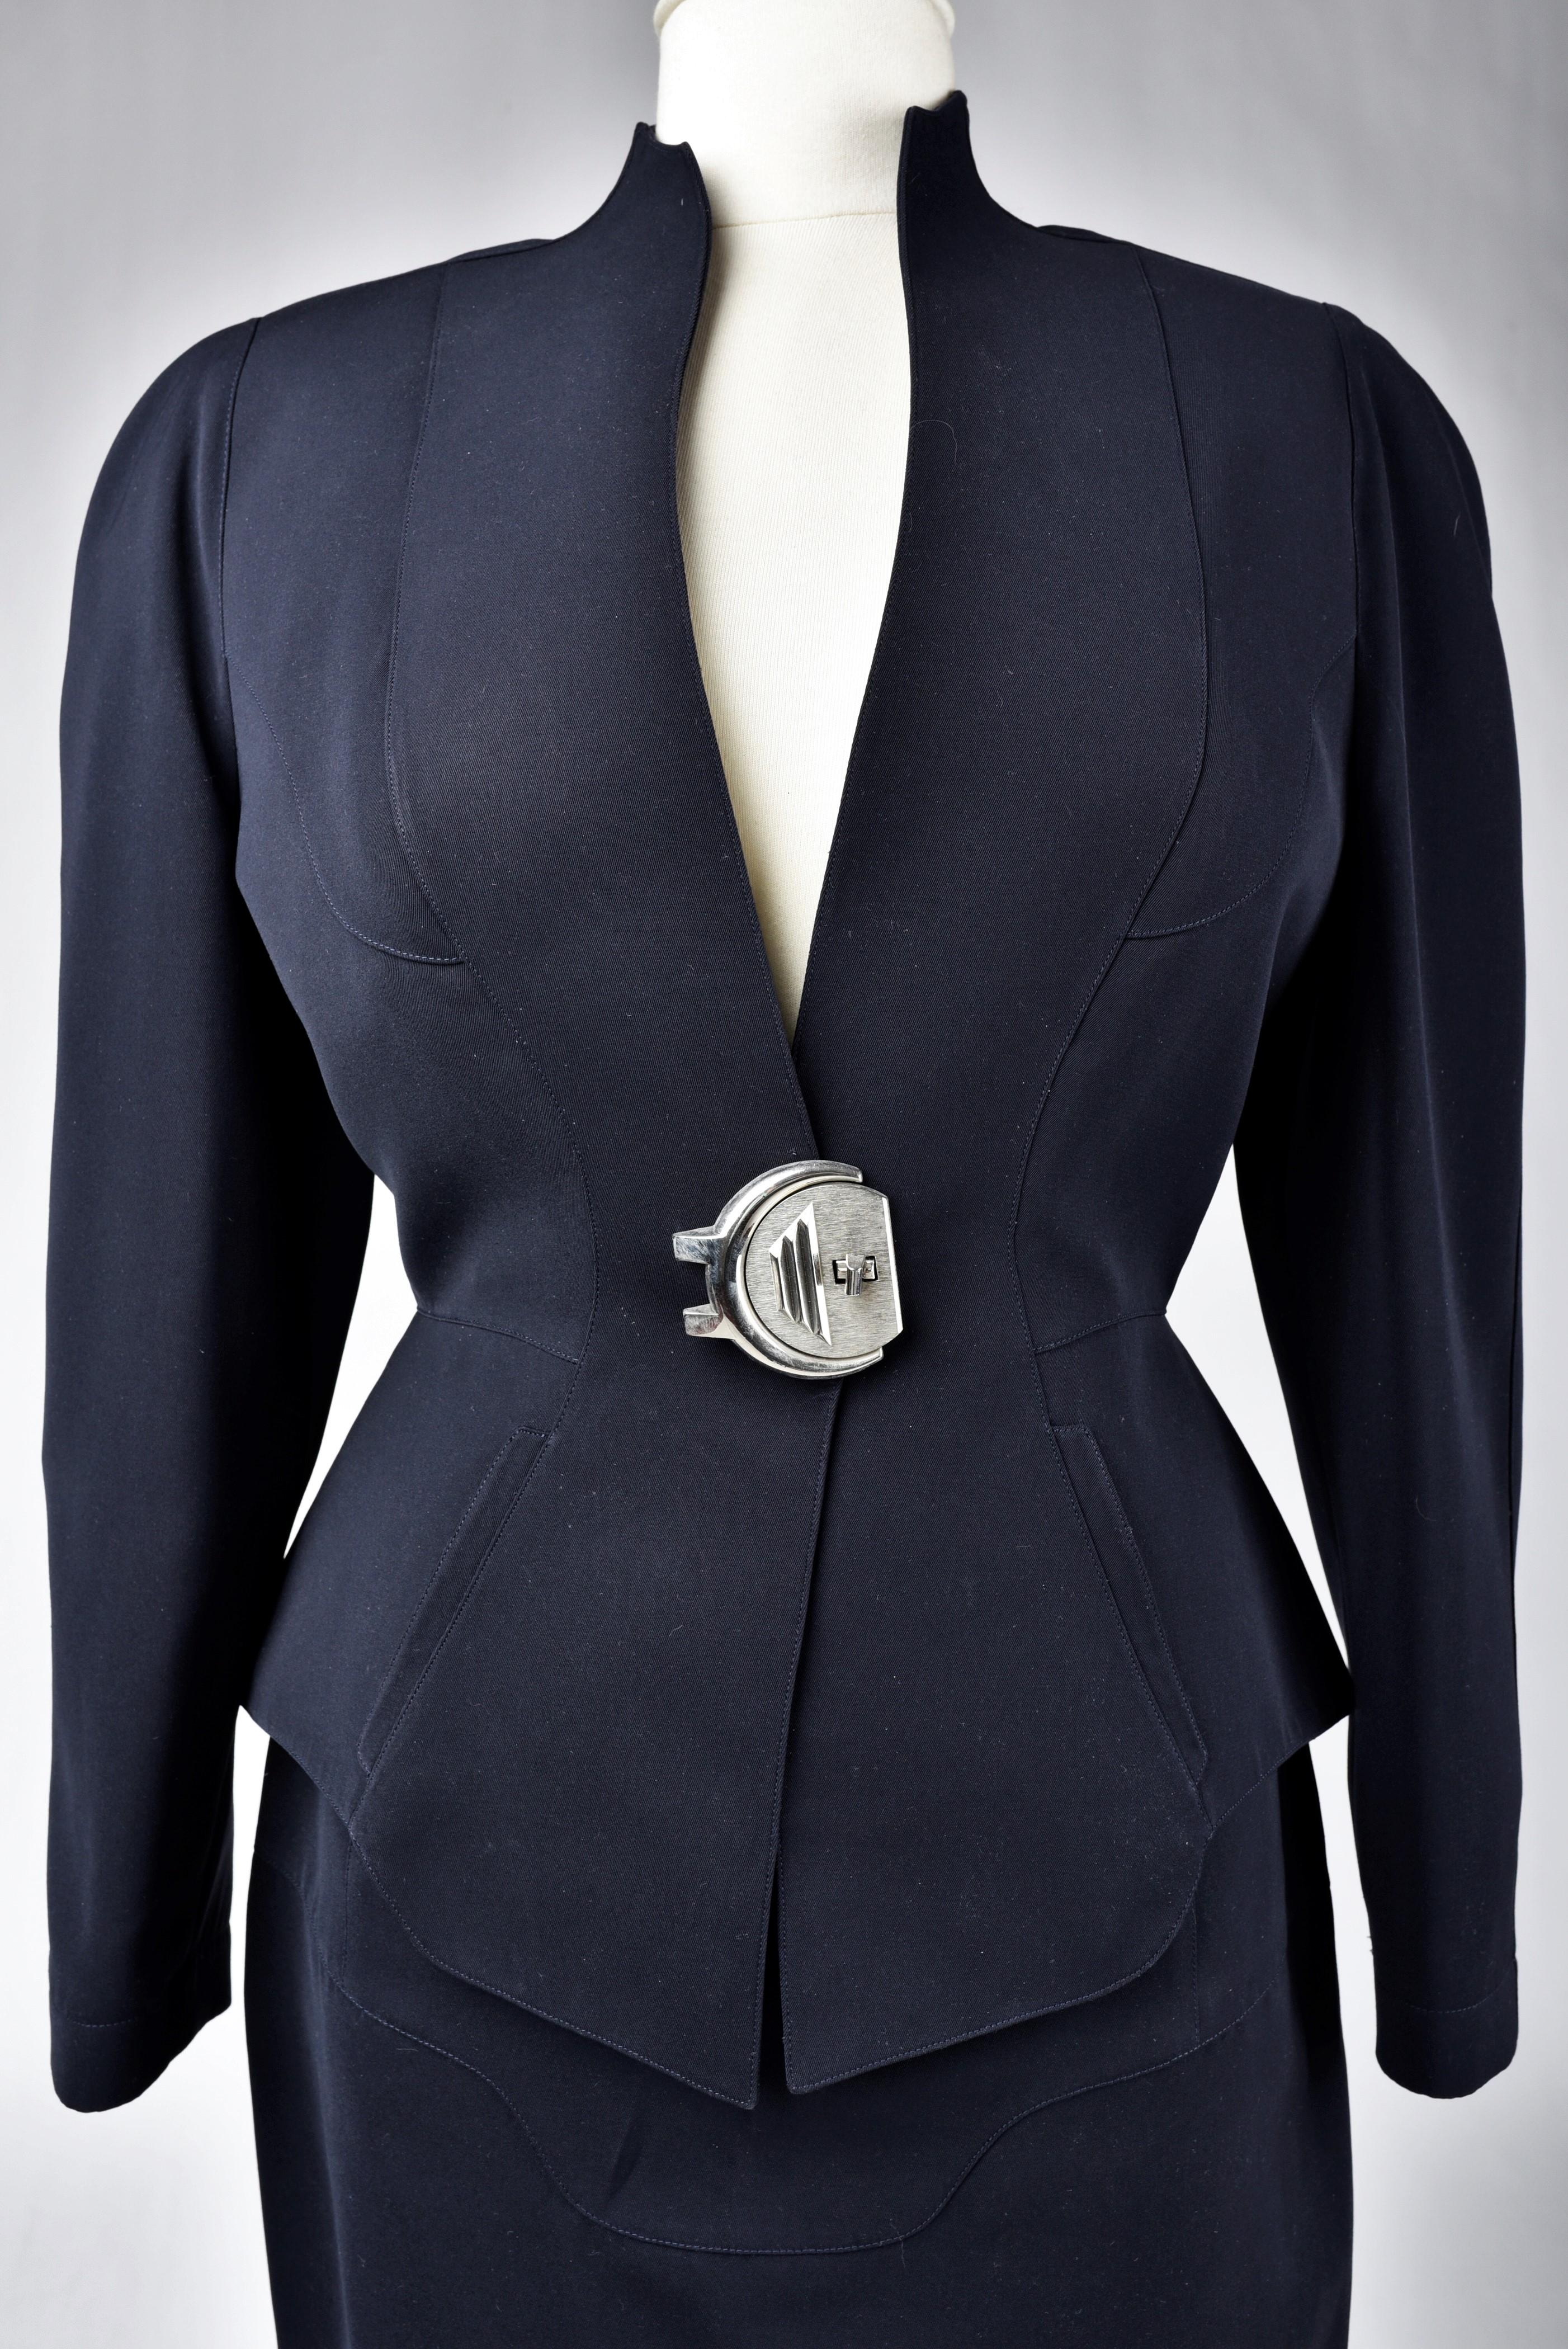 A Thierry Mugler Couture Black Tuxedo Skirt Suit - France Circa 1990/2000 For Sale 1